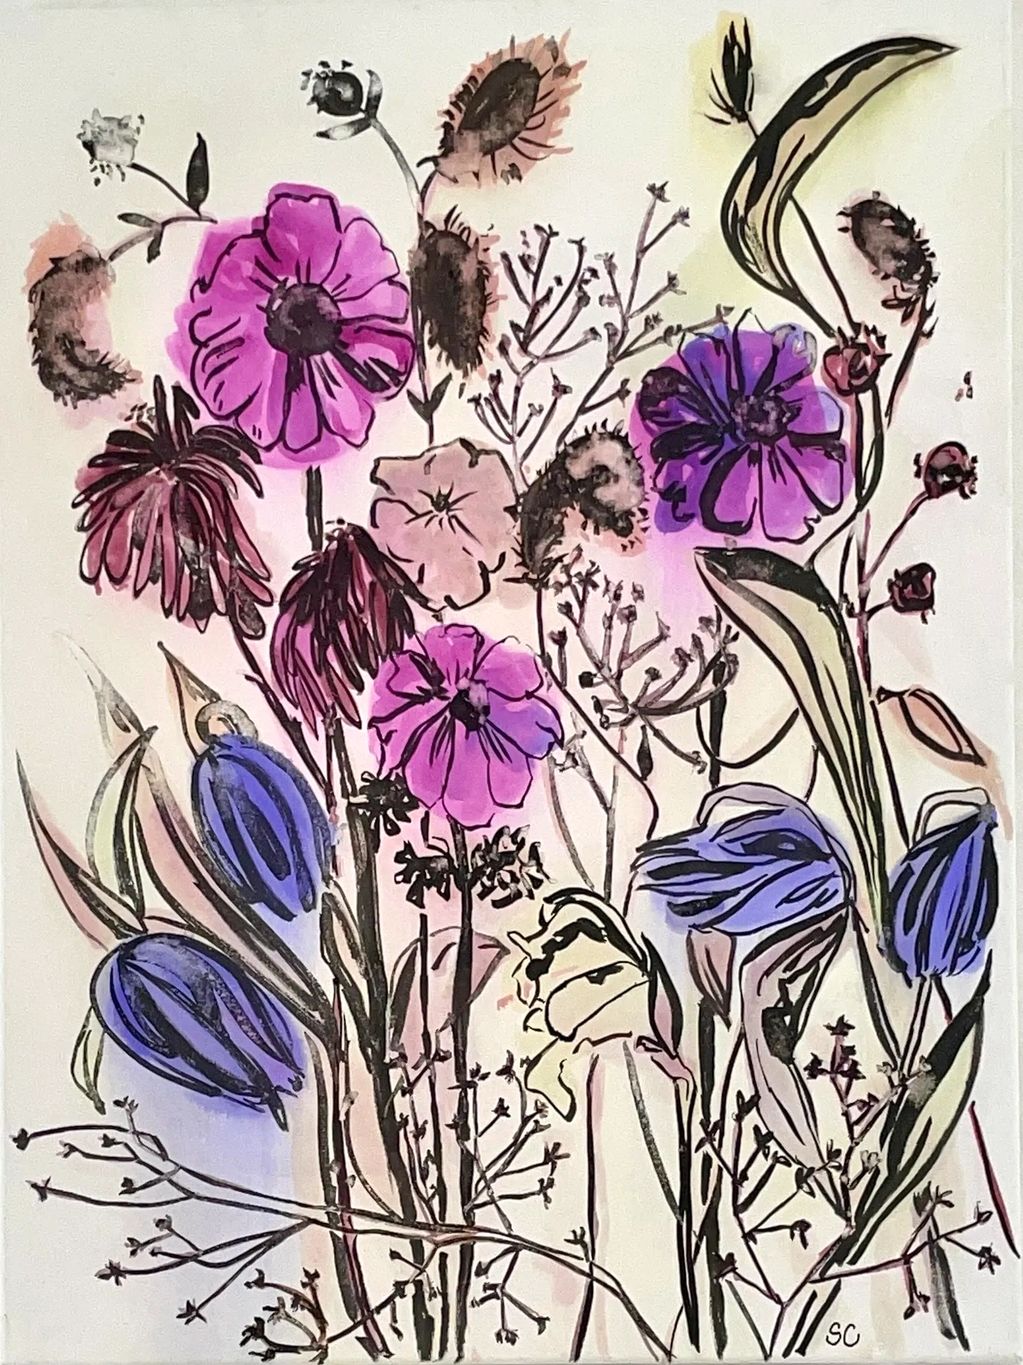 Poppy, Buddelia, Iron Weed, Asclepia 
with Ink
watercolor, graphite and ink on canvas
18" x 24"